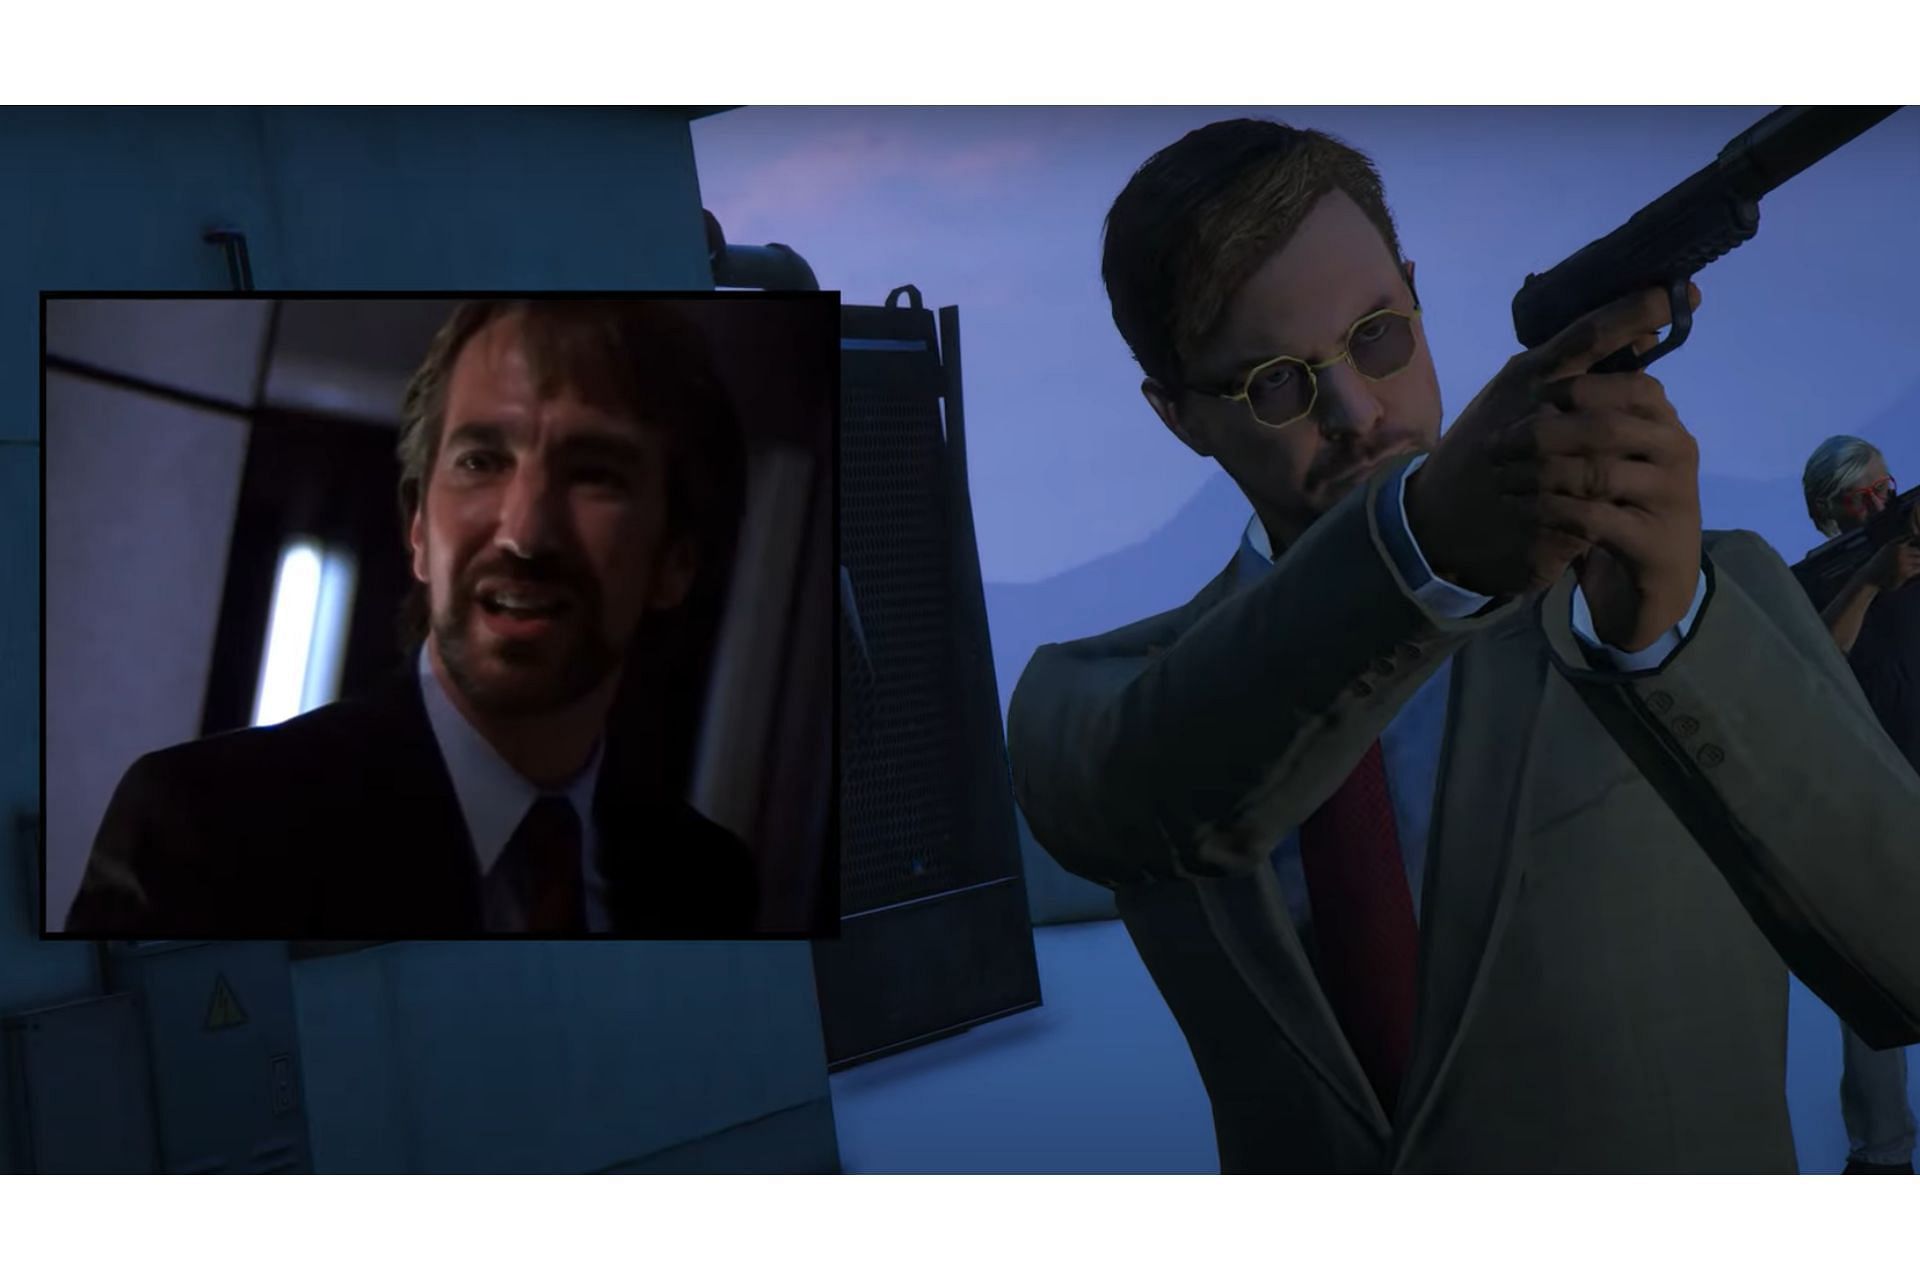 An NPC resembling Hans Gruber from the Die Hard movie in GTA Online (Image via YouTube)